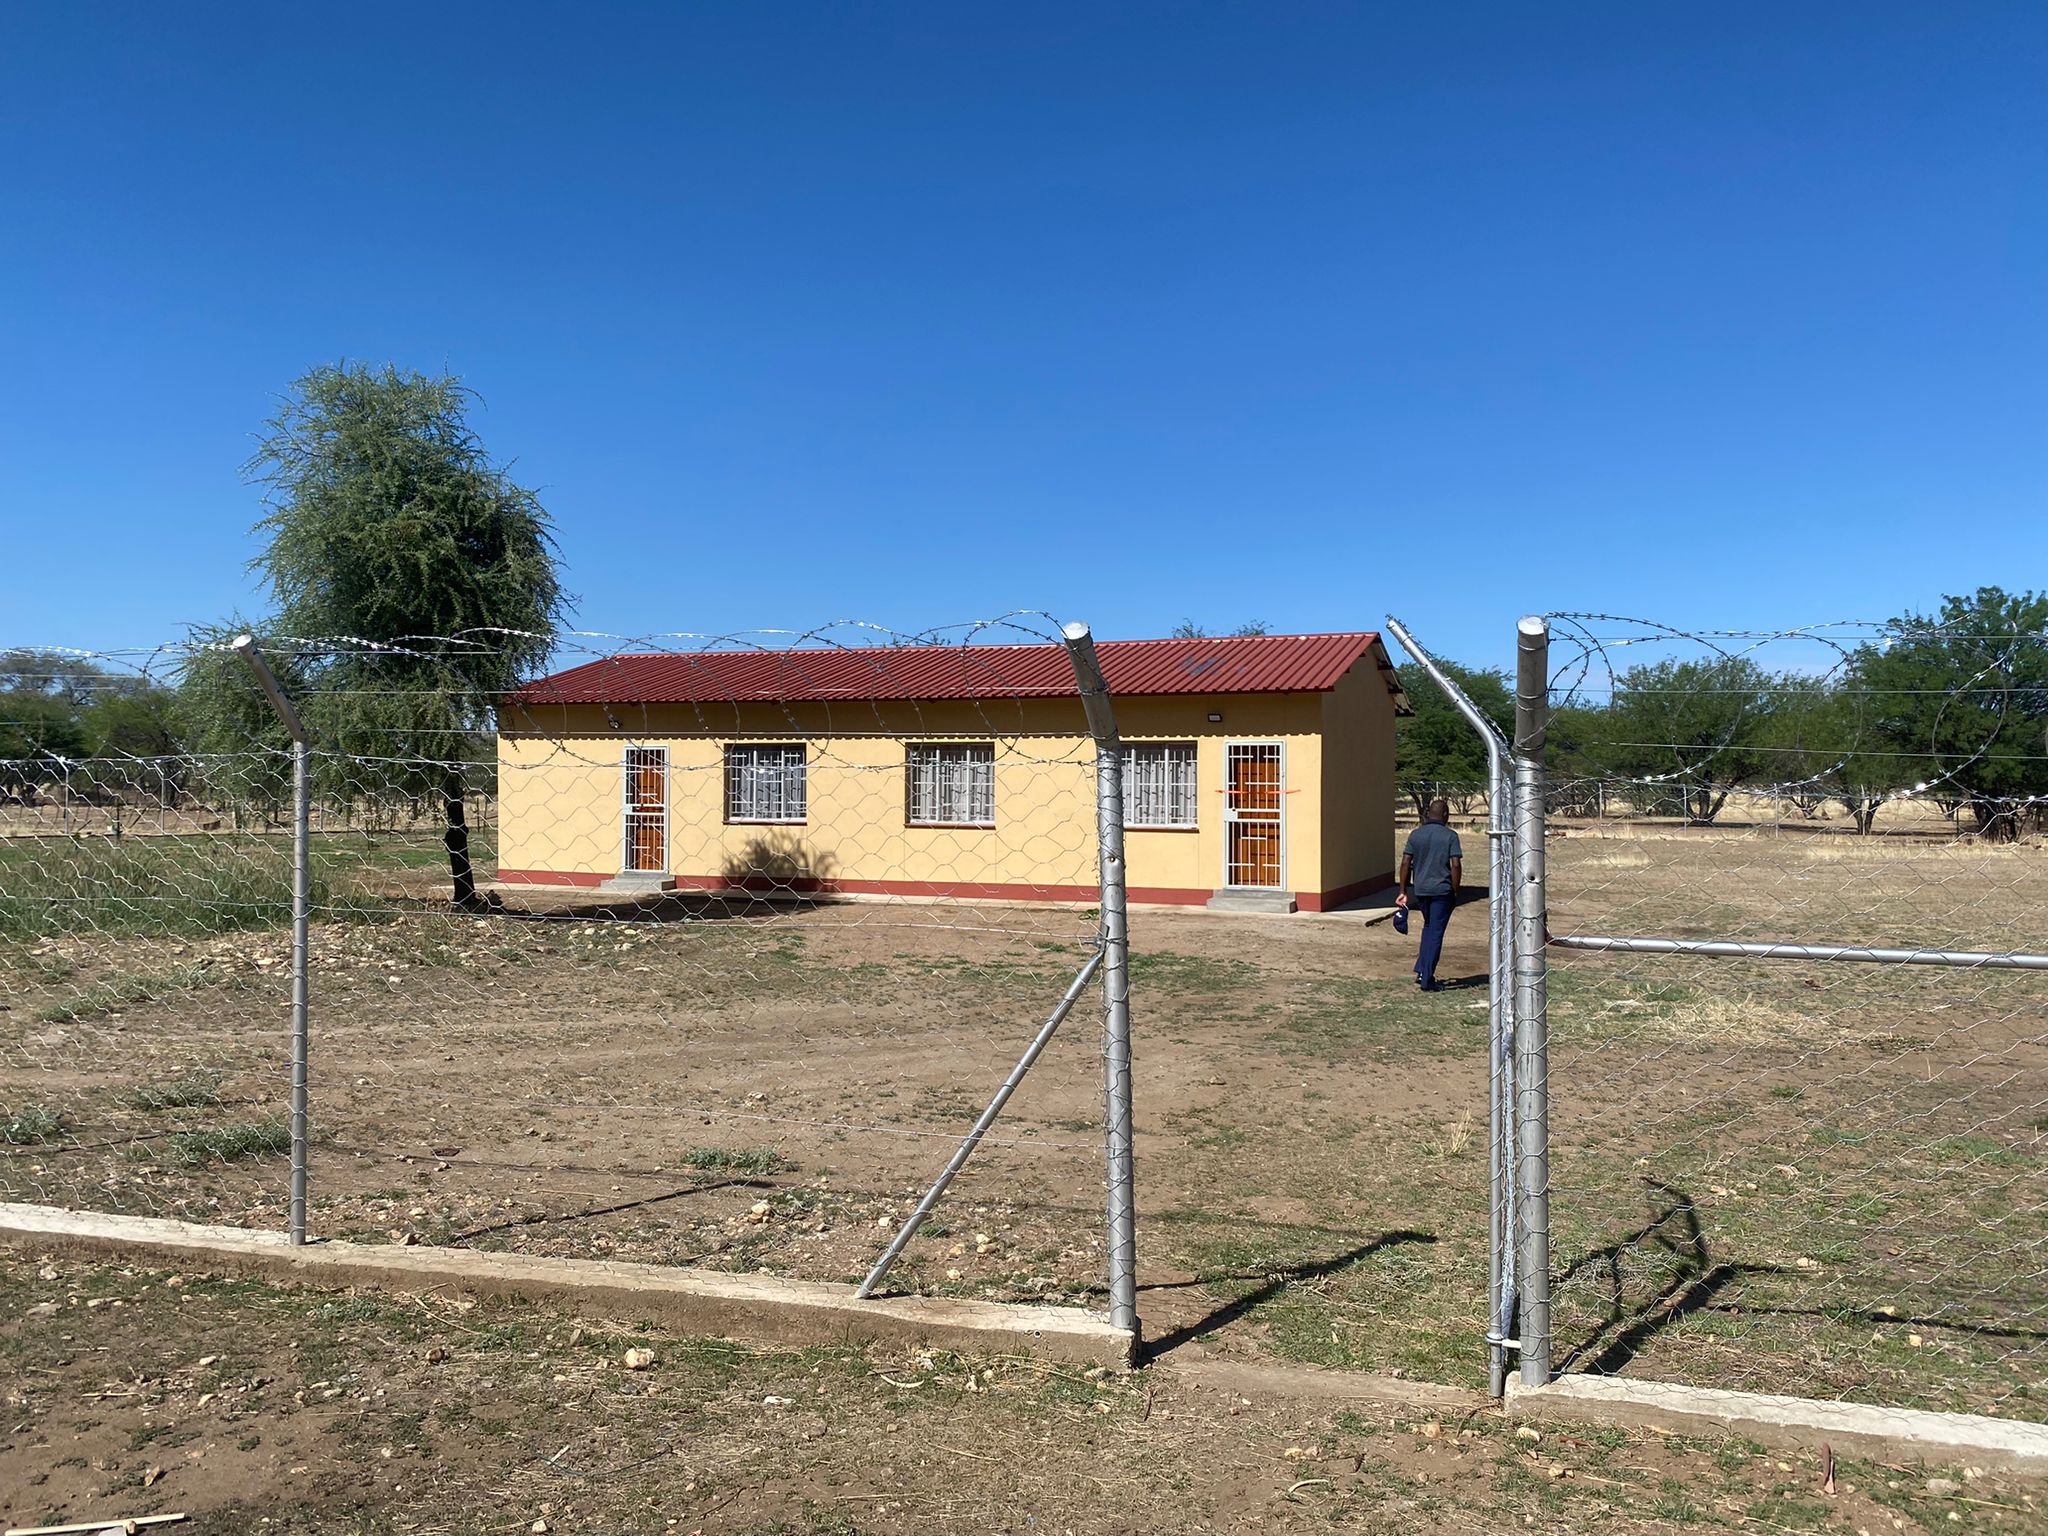 The Embassy of the Order to Namibia inaugurates a new professional school in Döbra